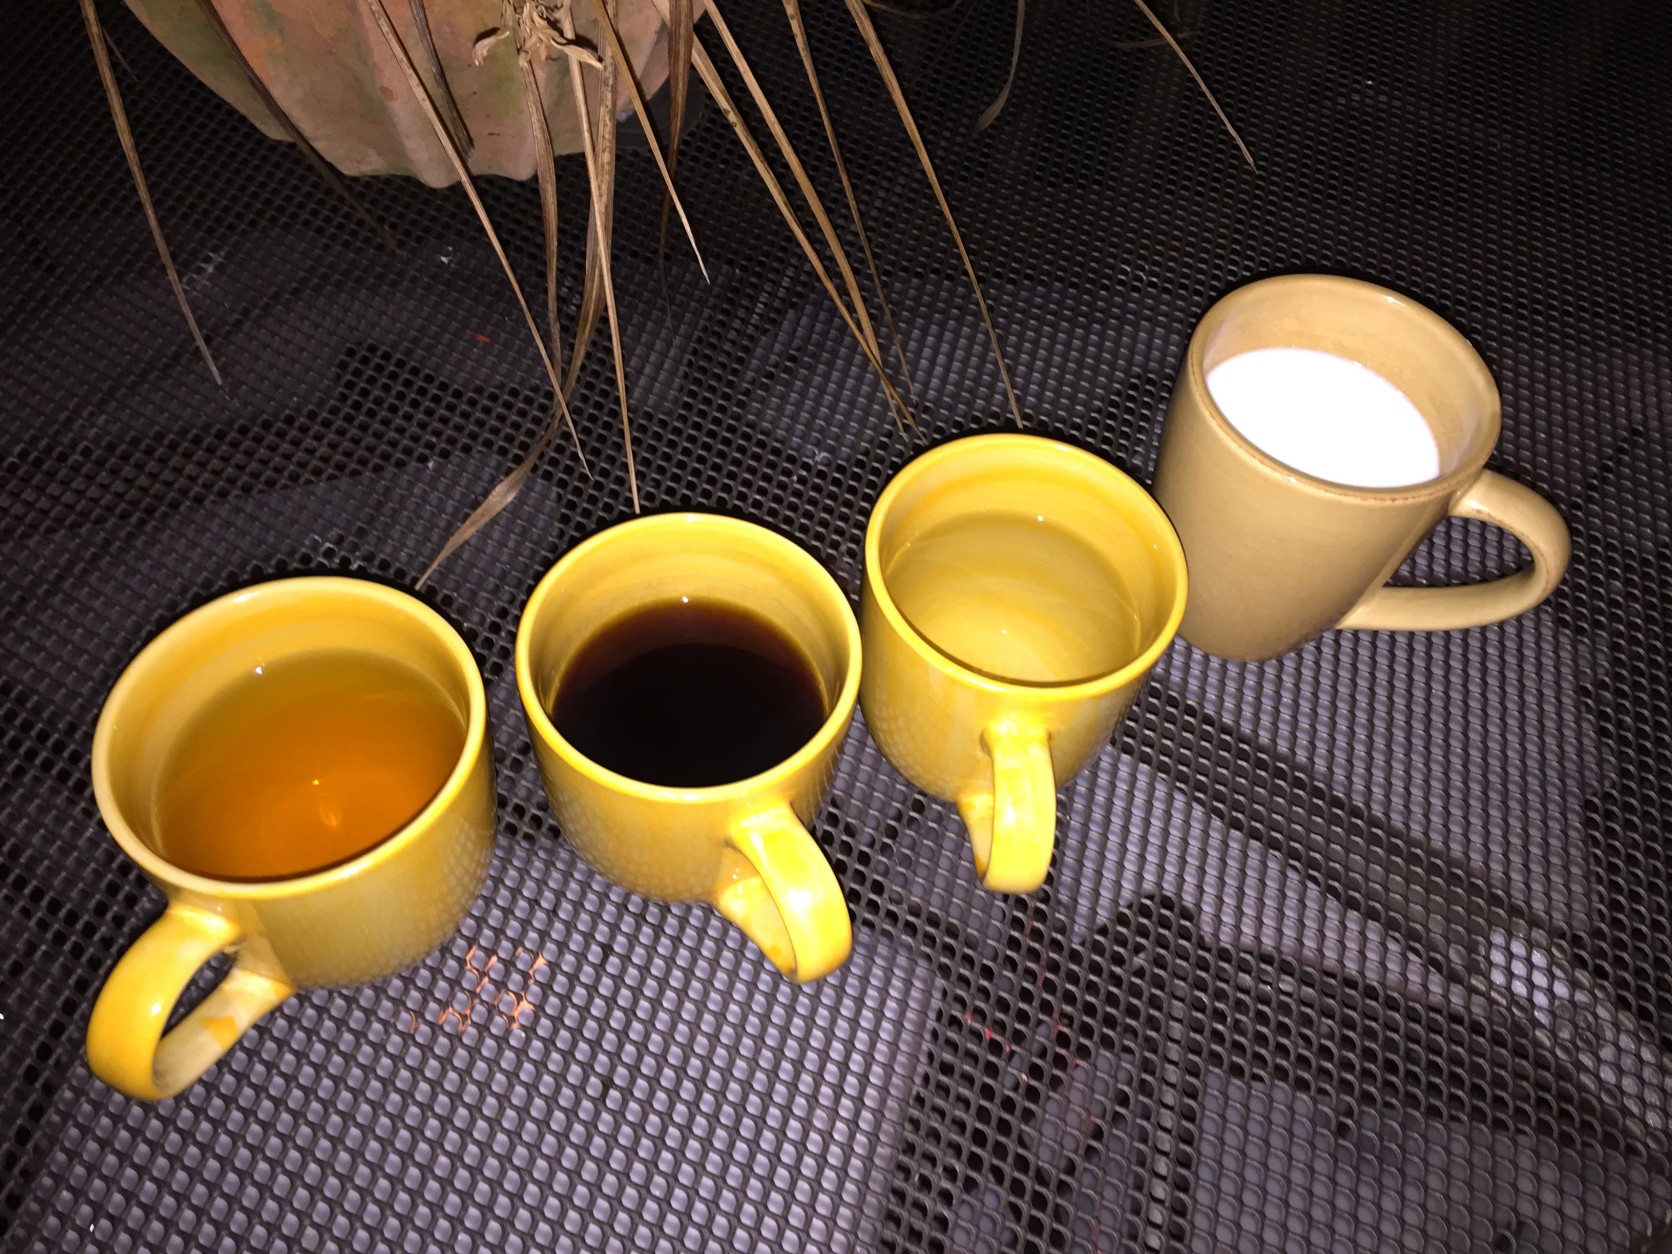 After 30 minutes in 10 degree temperatures, the   hot coffee is cool, and the cold milk is even colder. (WTOP/Neal Augenstein)